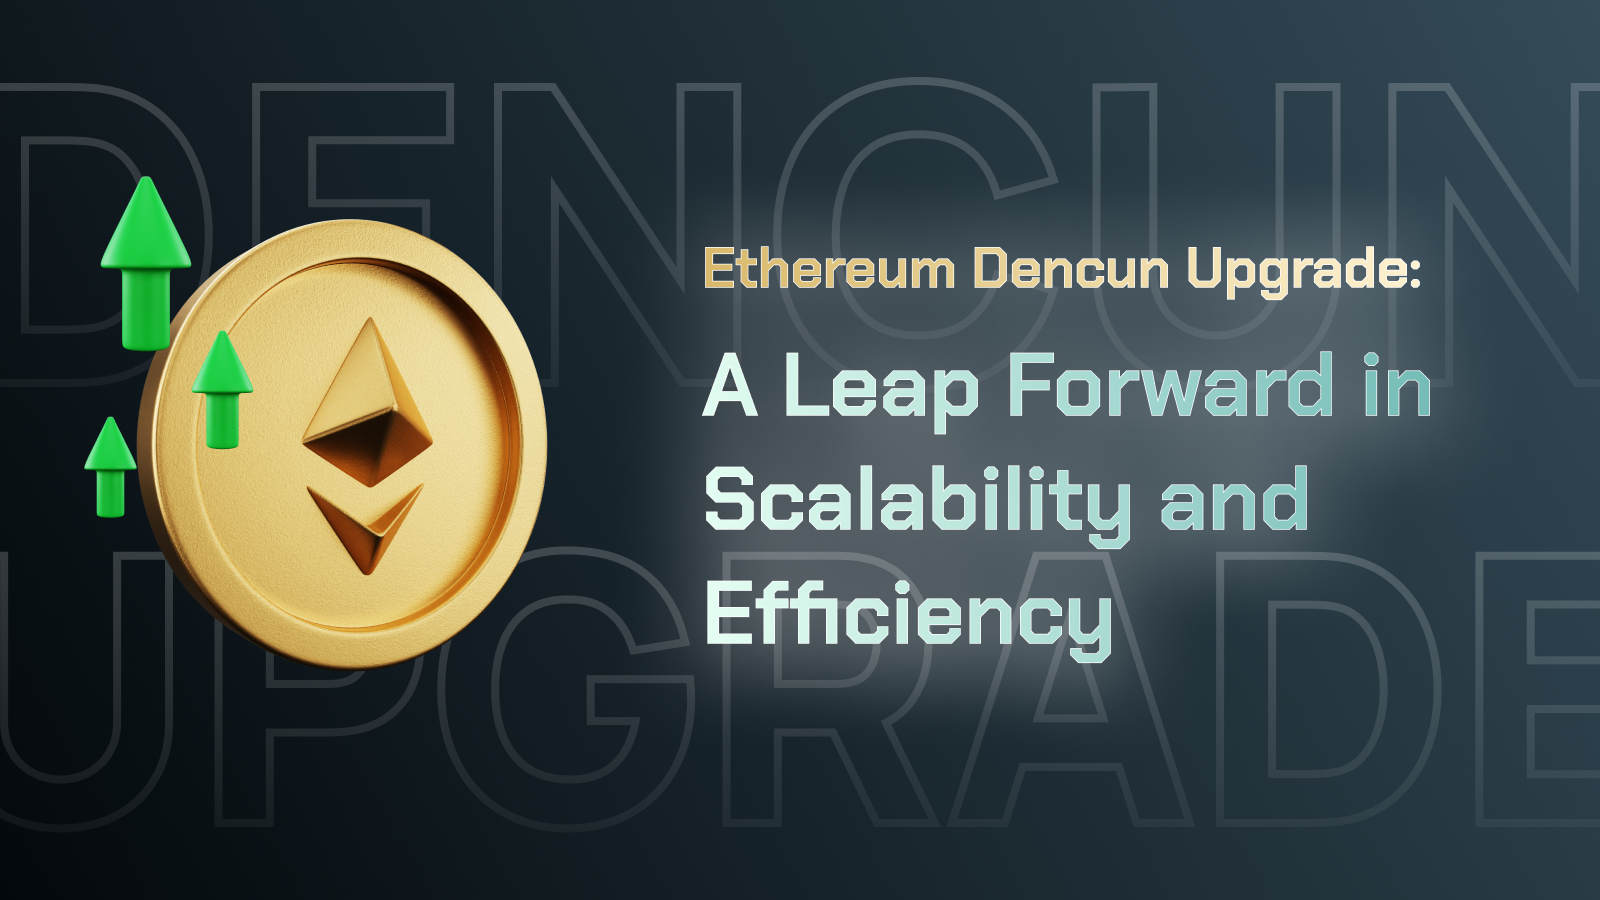 Ethereum Dencun Upgrade: A Leap Forward in Scalability and Efficiency